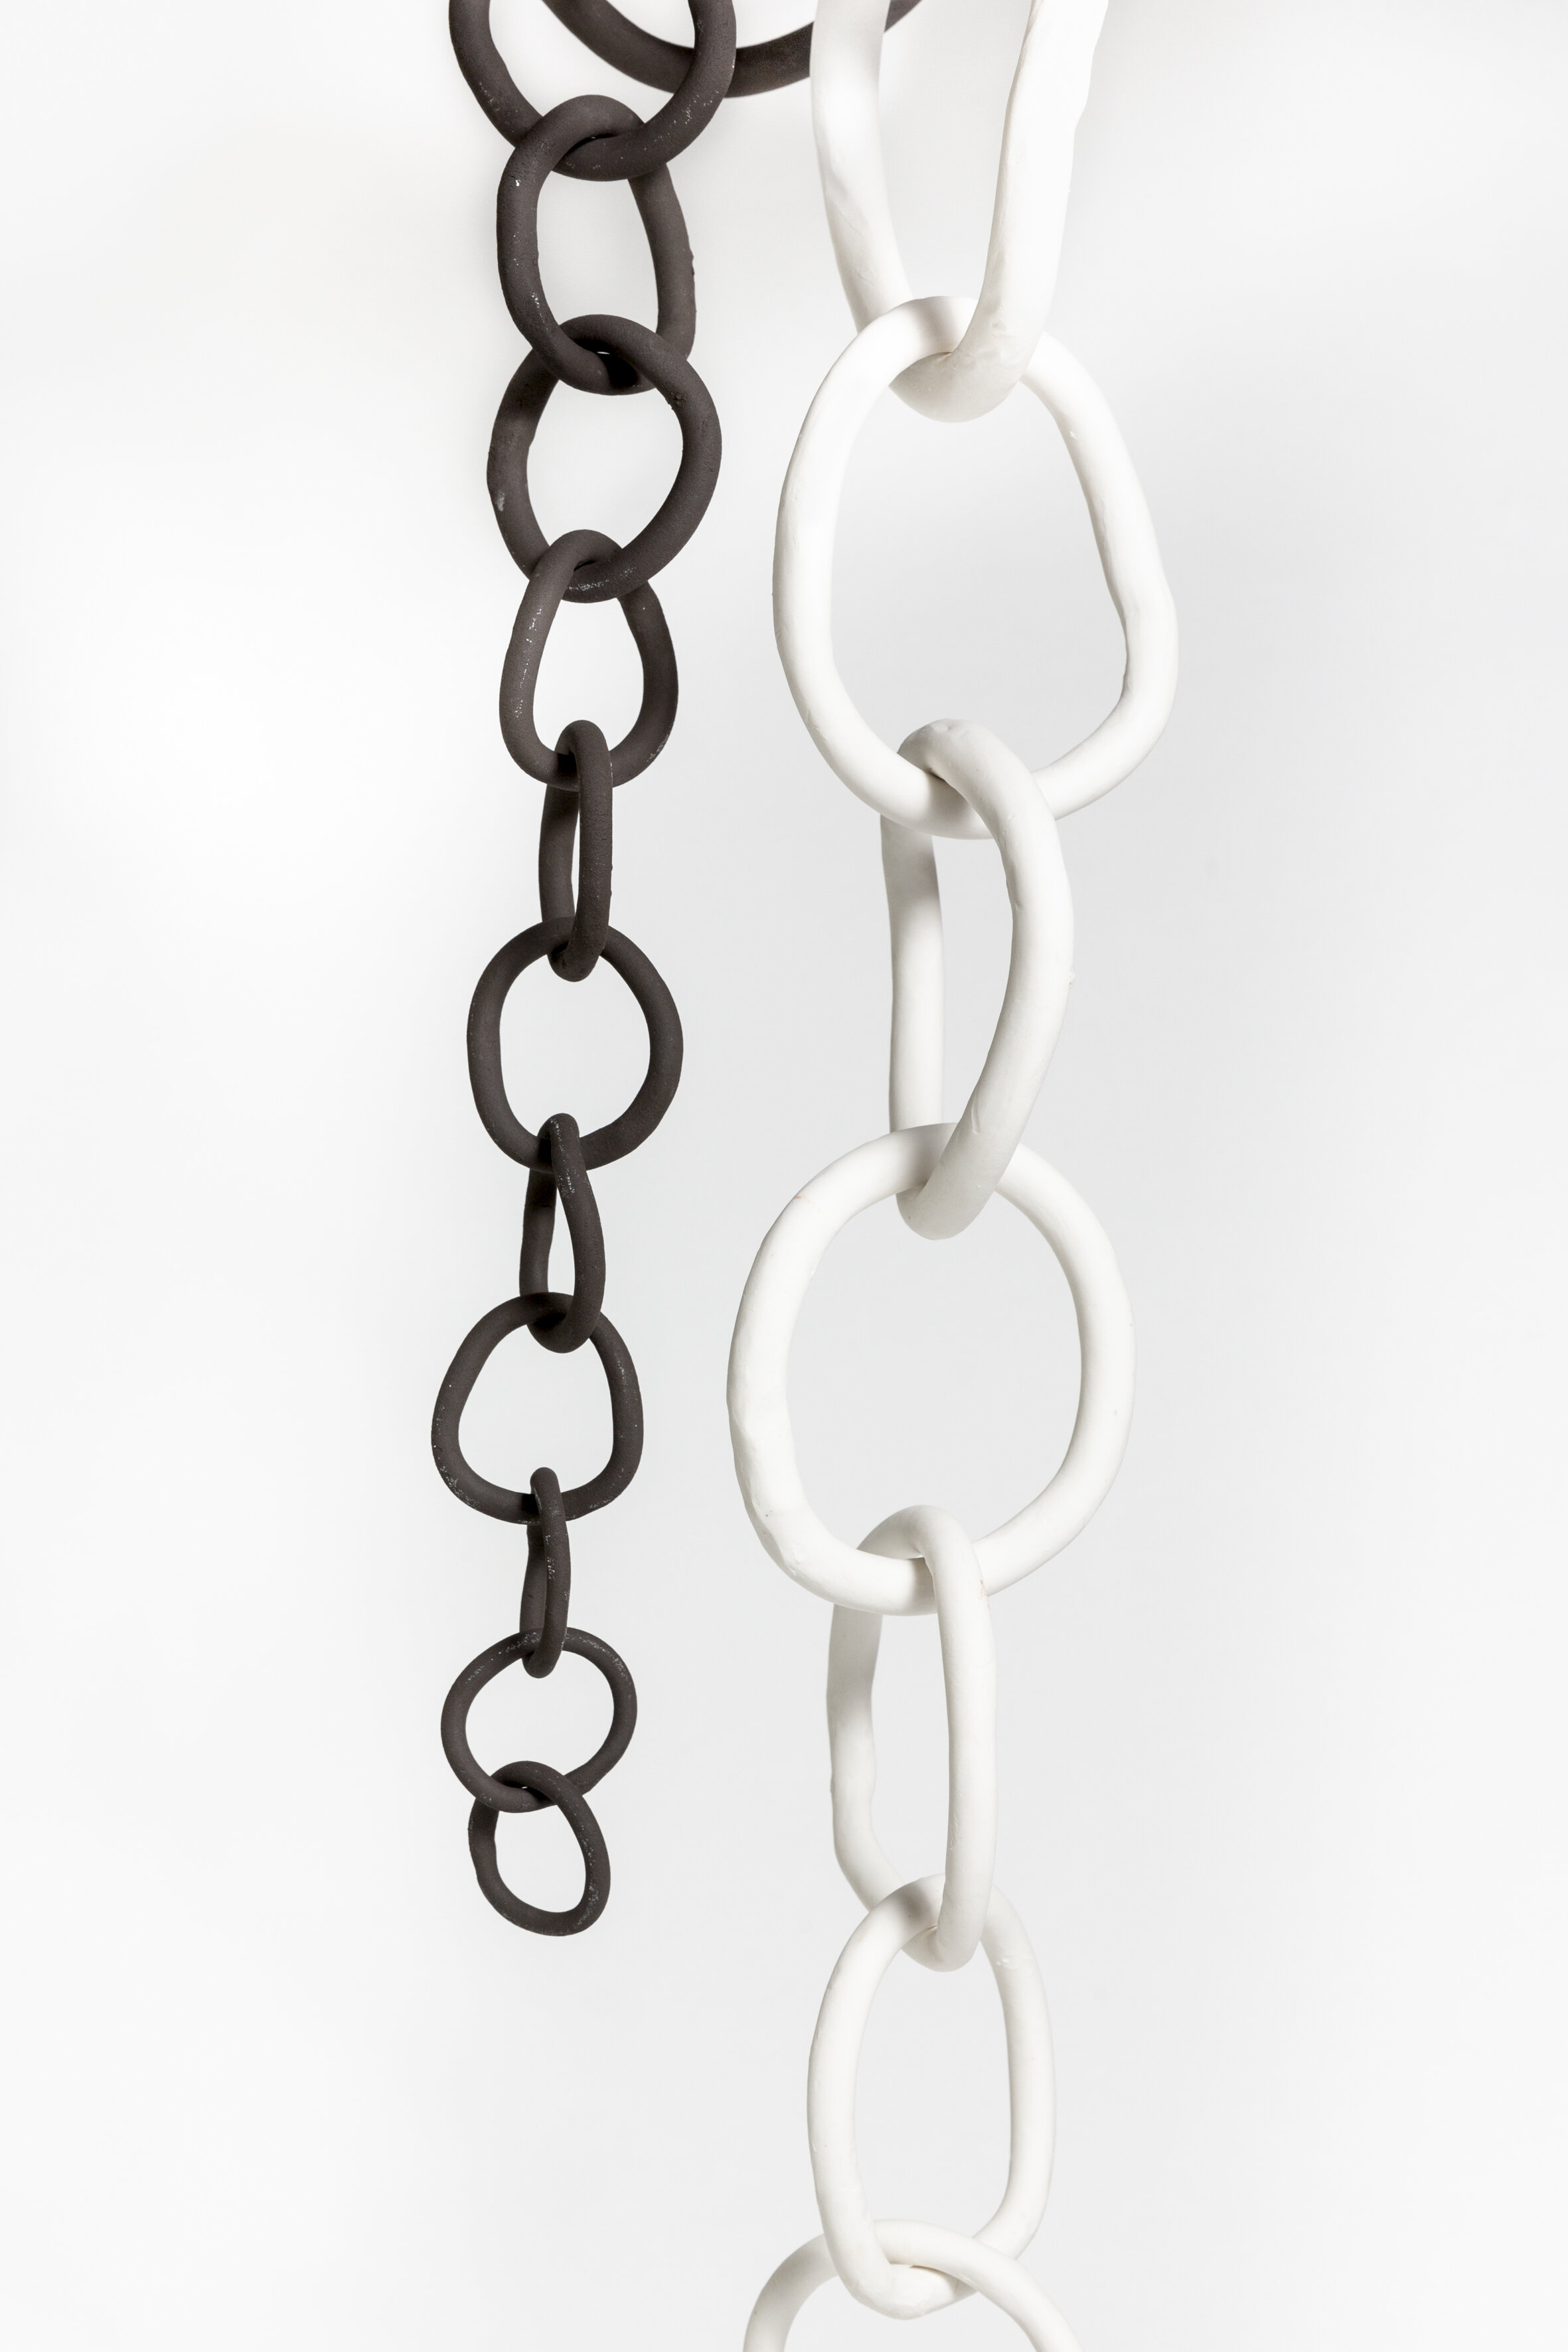   Sound Sculptures (Chains) , Stoneware Ceramic and Porcelain, Dimensions variable 